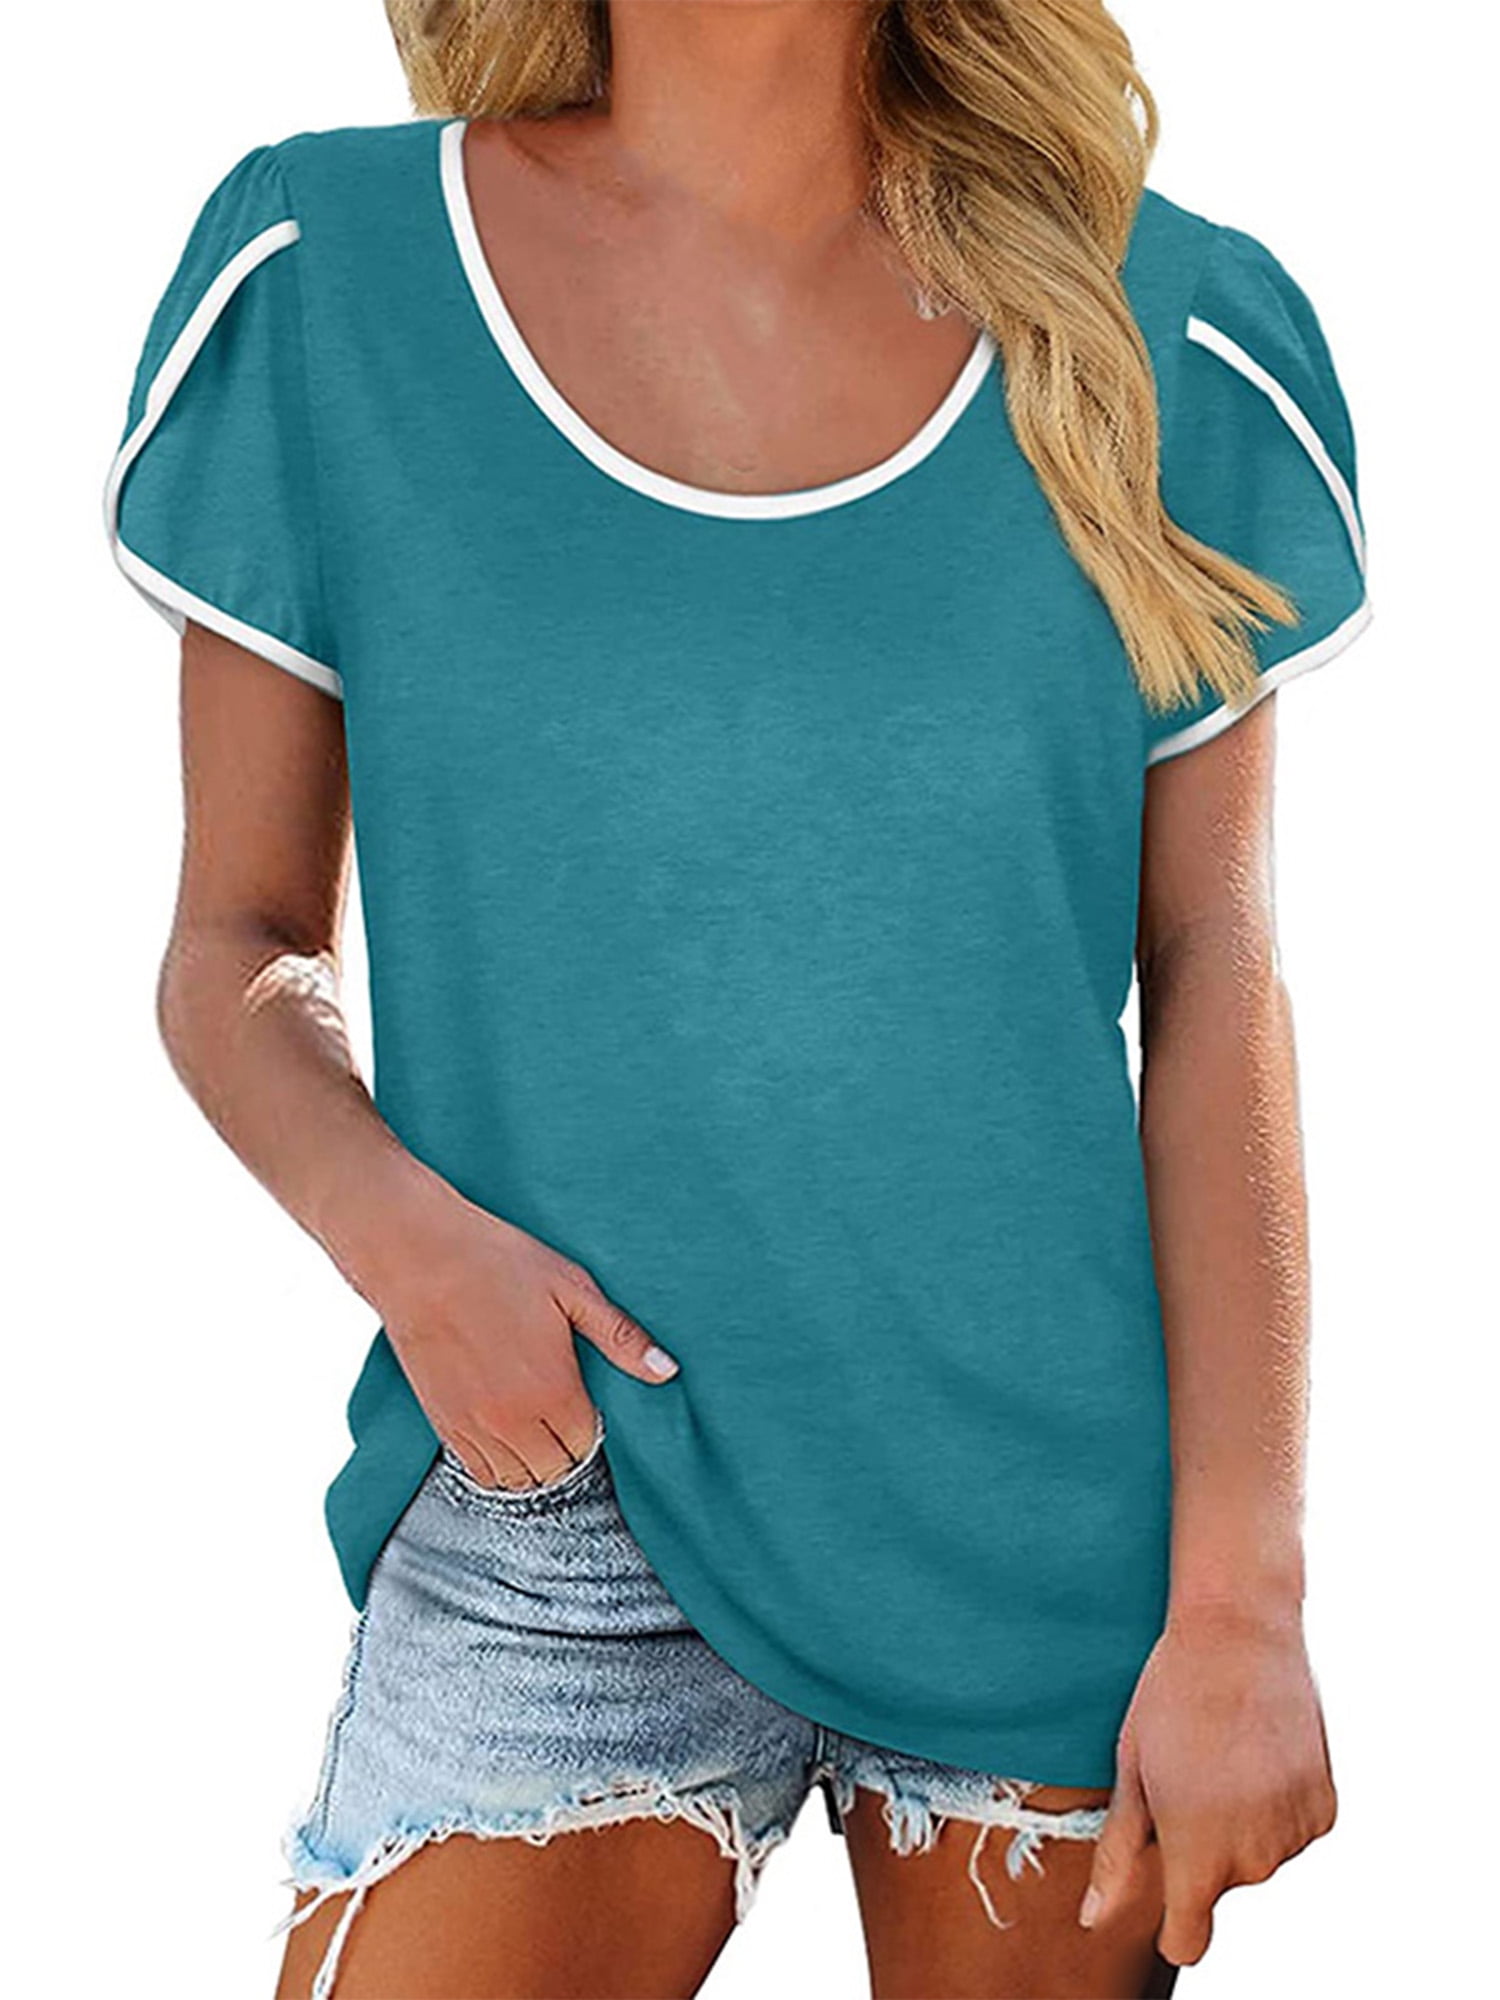 Holiday Tops Blouse T shirt Womens Summer Solid Color Crew neck Clothes 